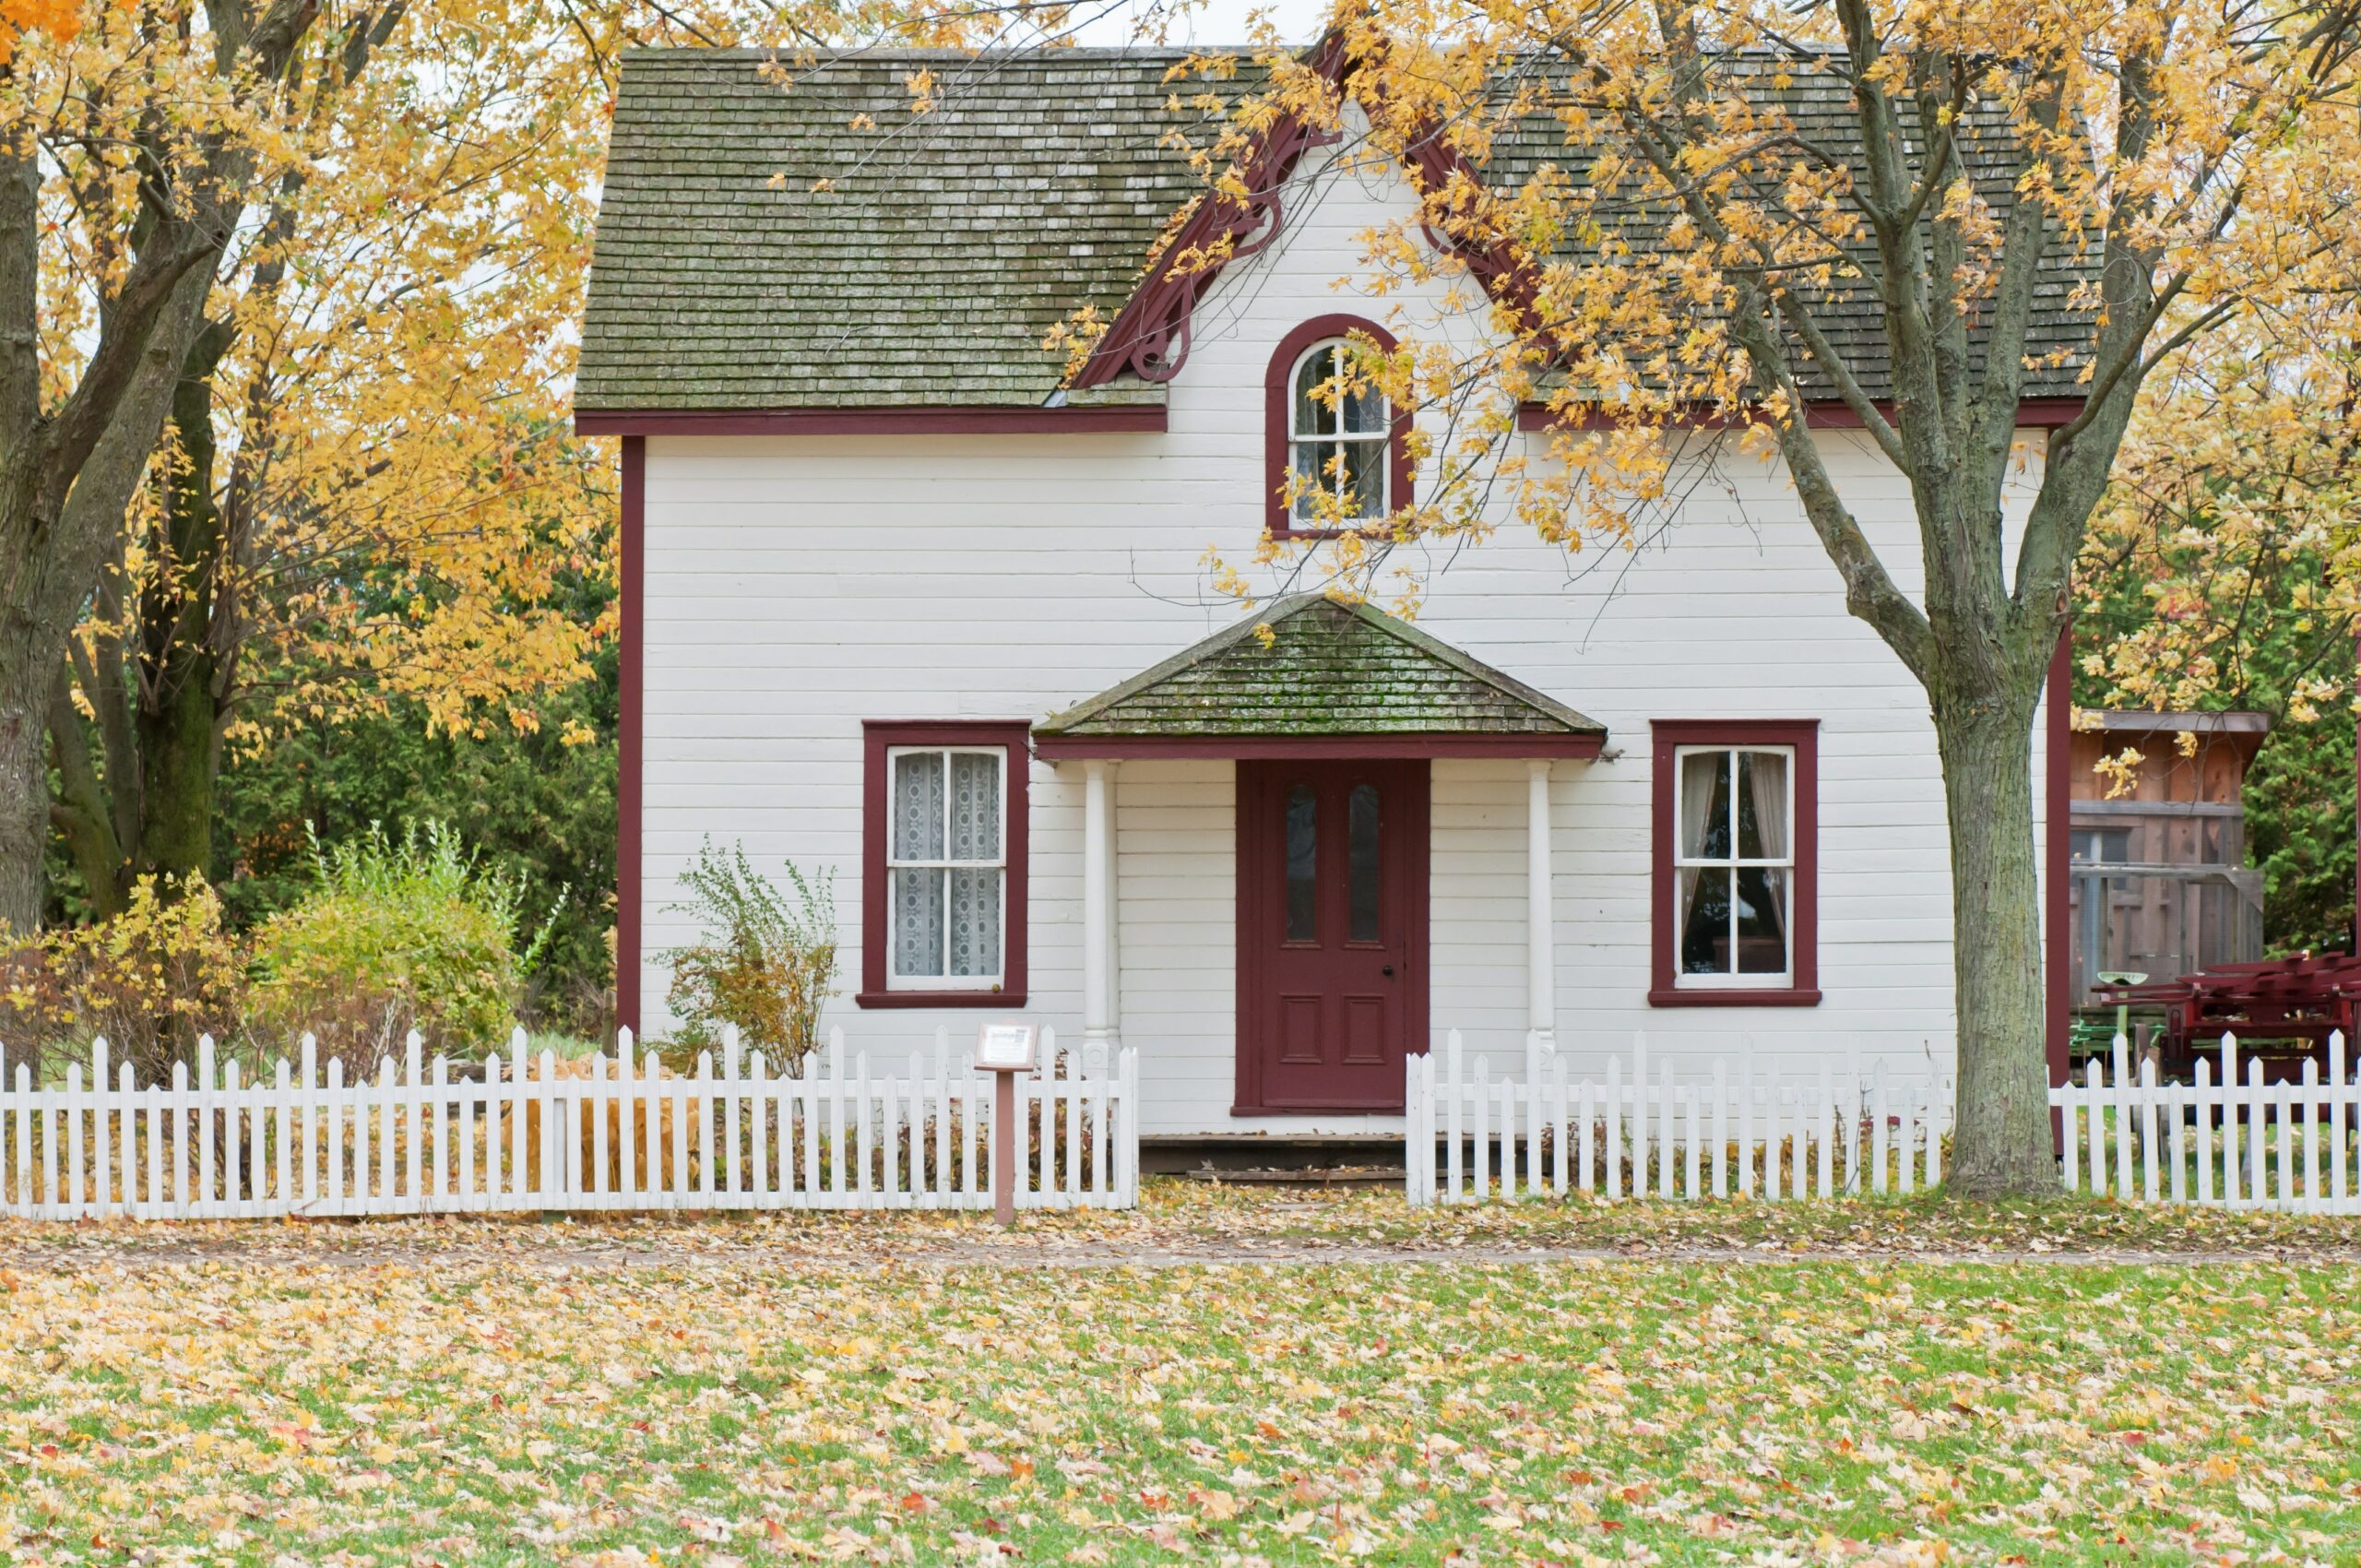 A cottage in autumn with yellow leaves falling.